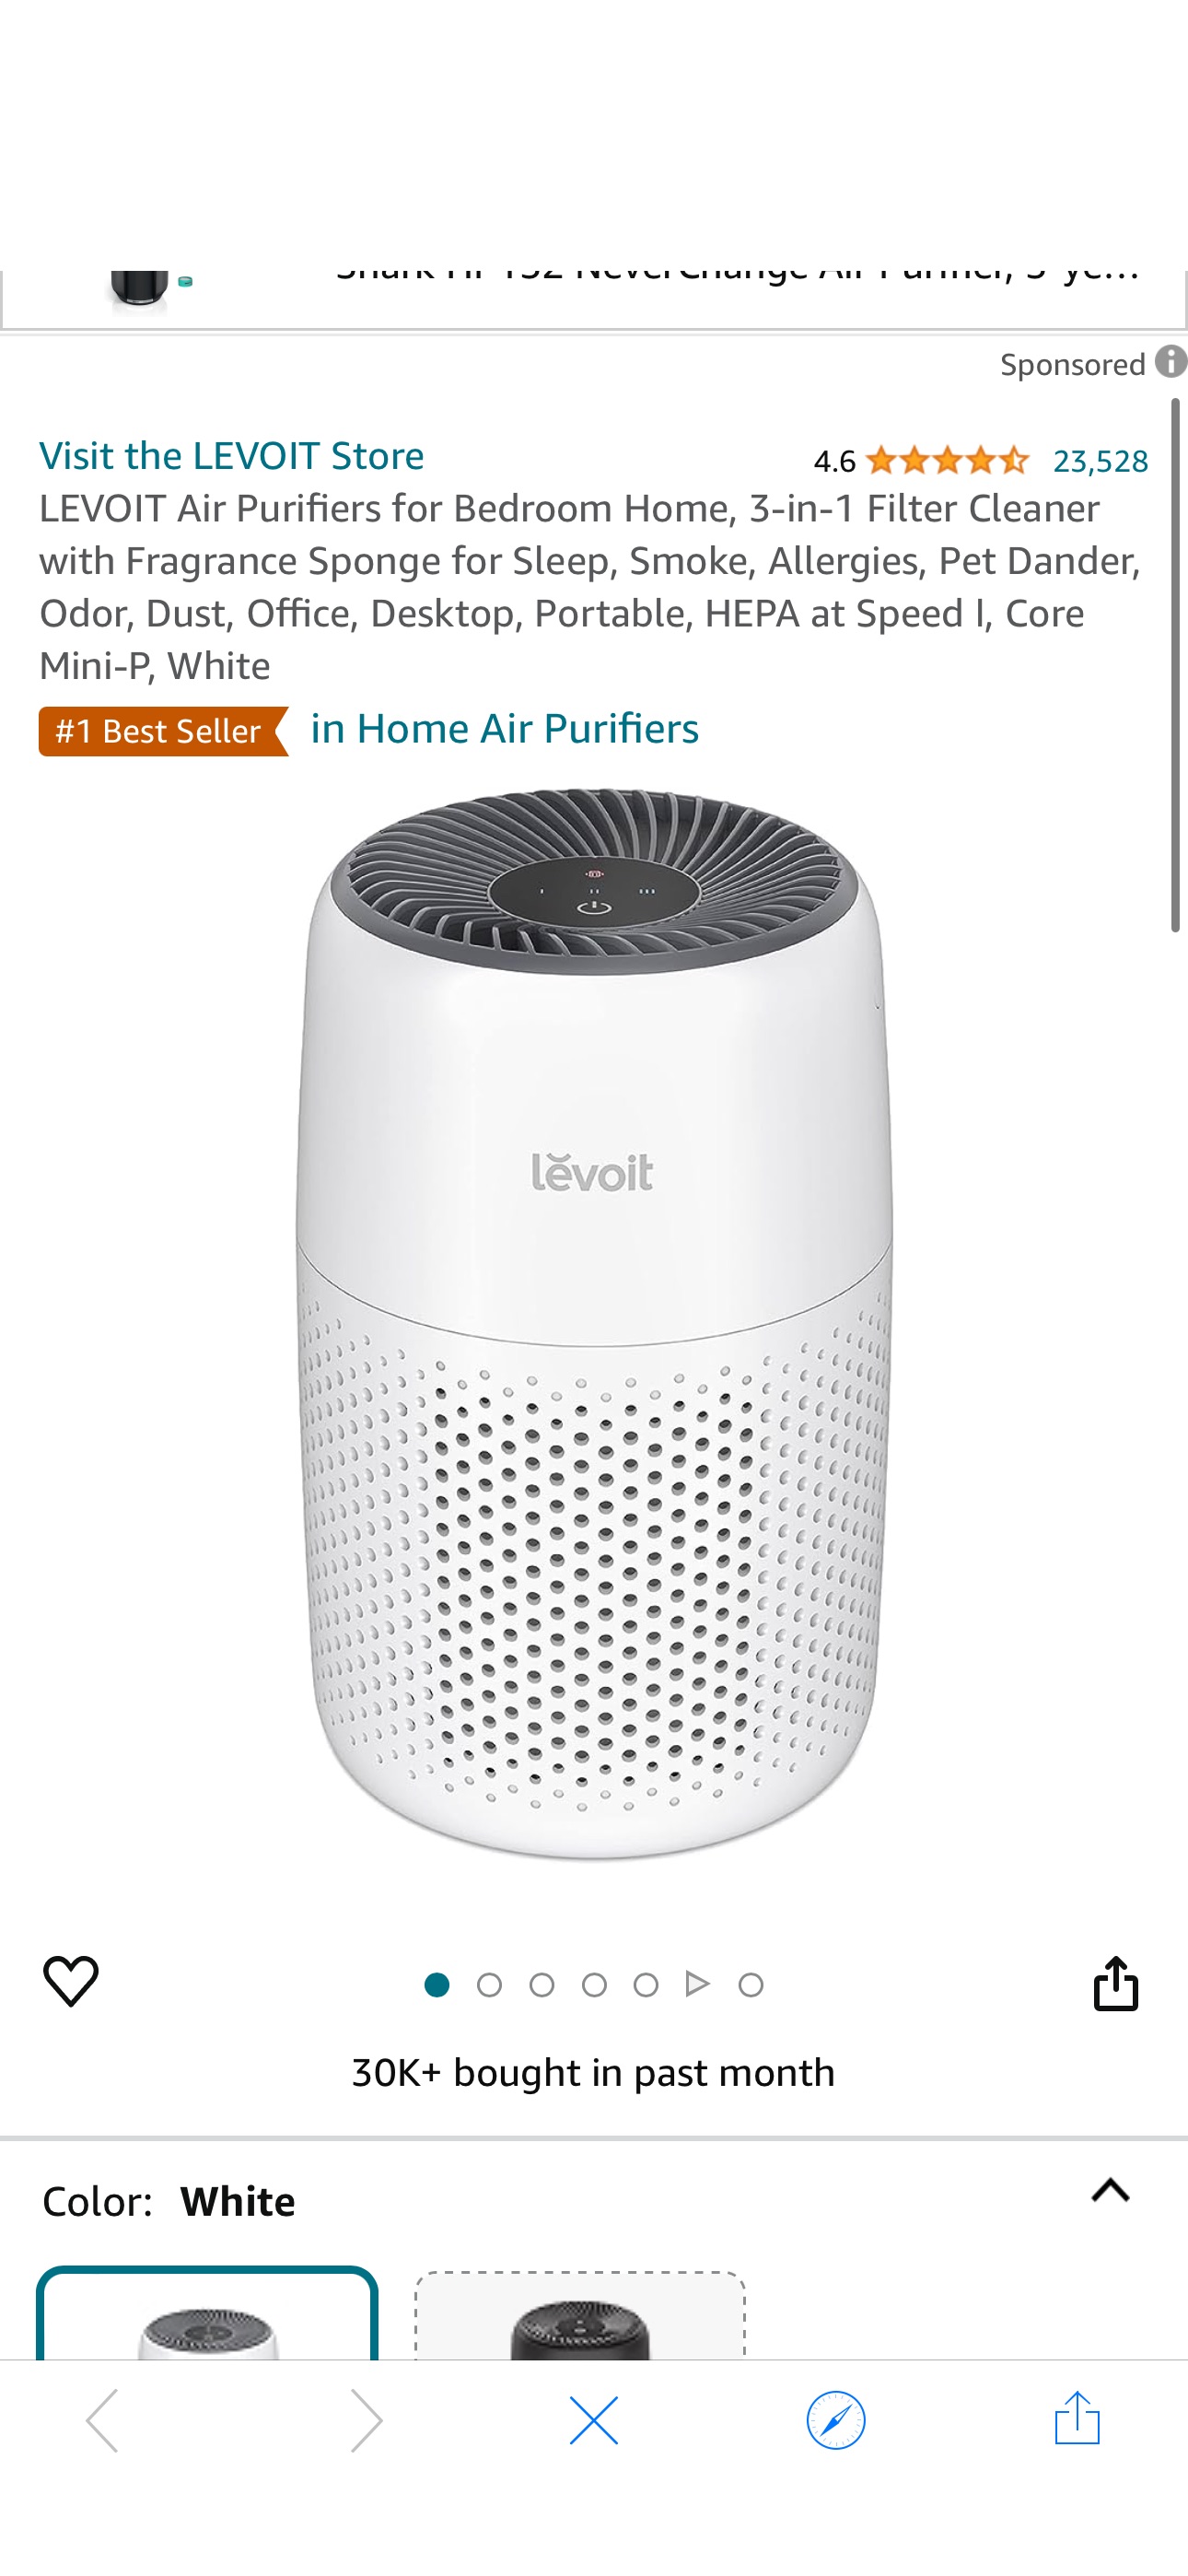 Amazon.com: LEVOIT Air Purifiers for Bedroom Home, 3-in-1 Filter Cleaner with Fragrance Sponge for Sleep, Smoke, Allergies, Pet Dander, Odor, Dust, Office, Desktop, Portable, HEPA at Speed Ⅰ, Core Min